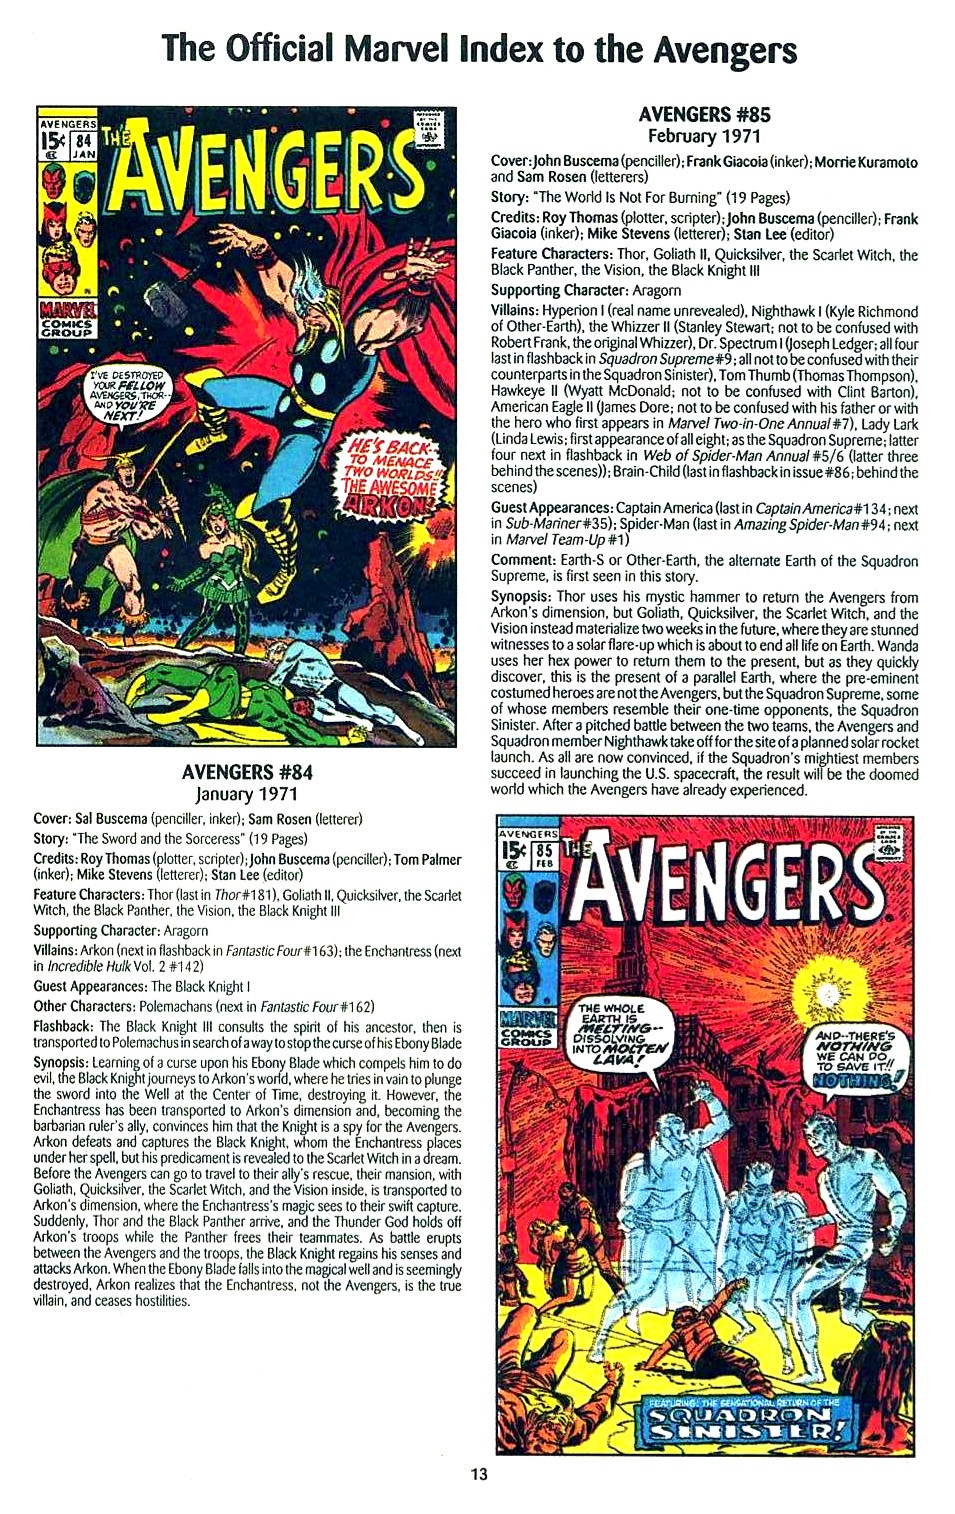 Read online The Official Marvel Index to the Avengers comic -  Issue #2 - 15